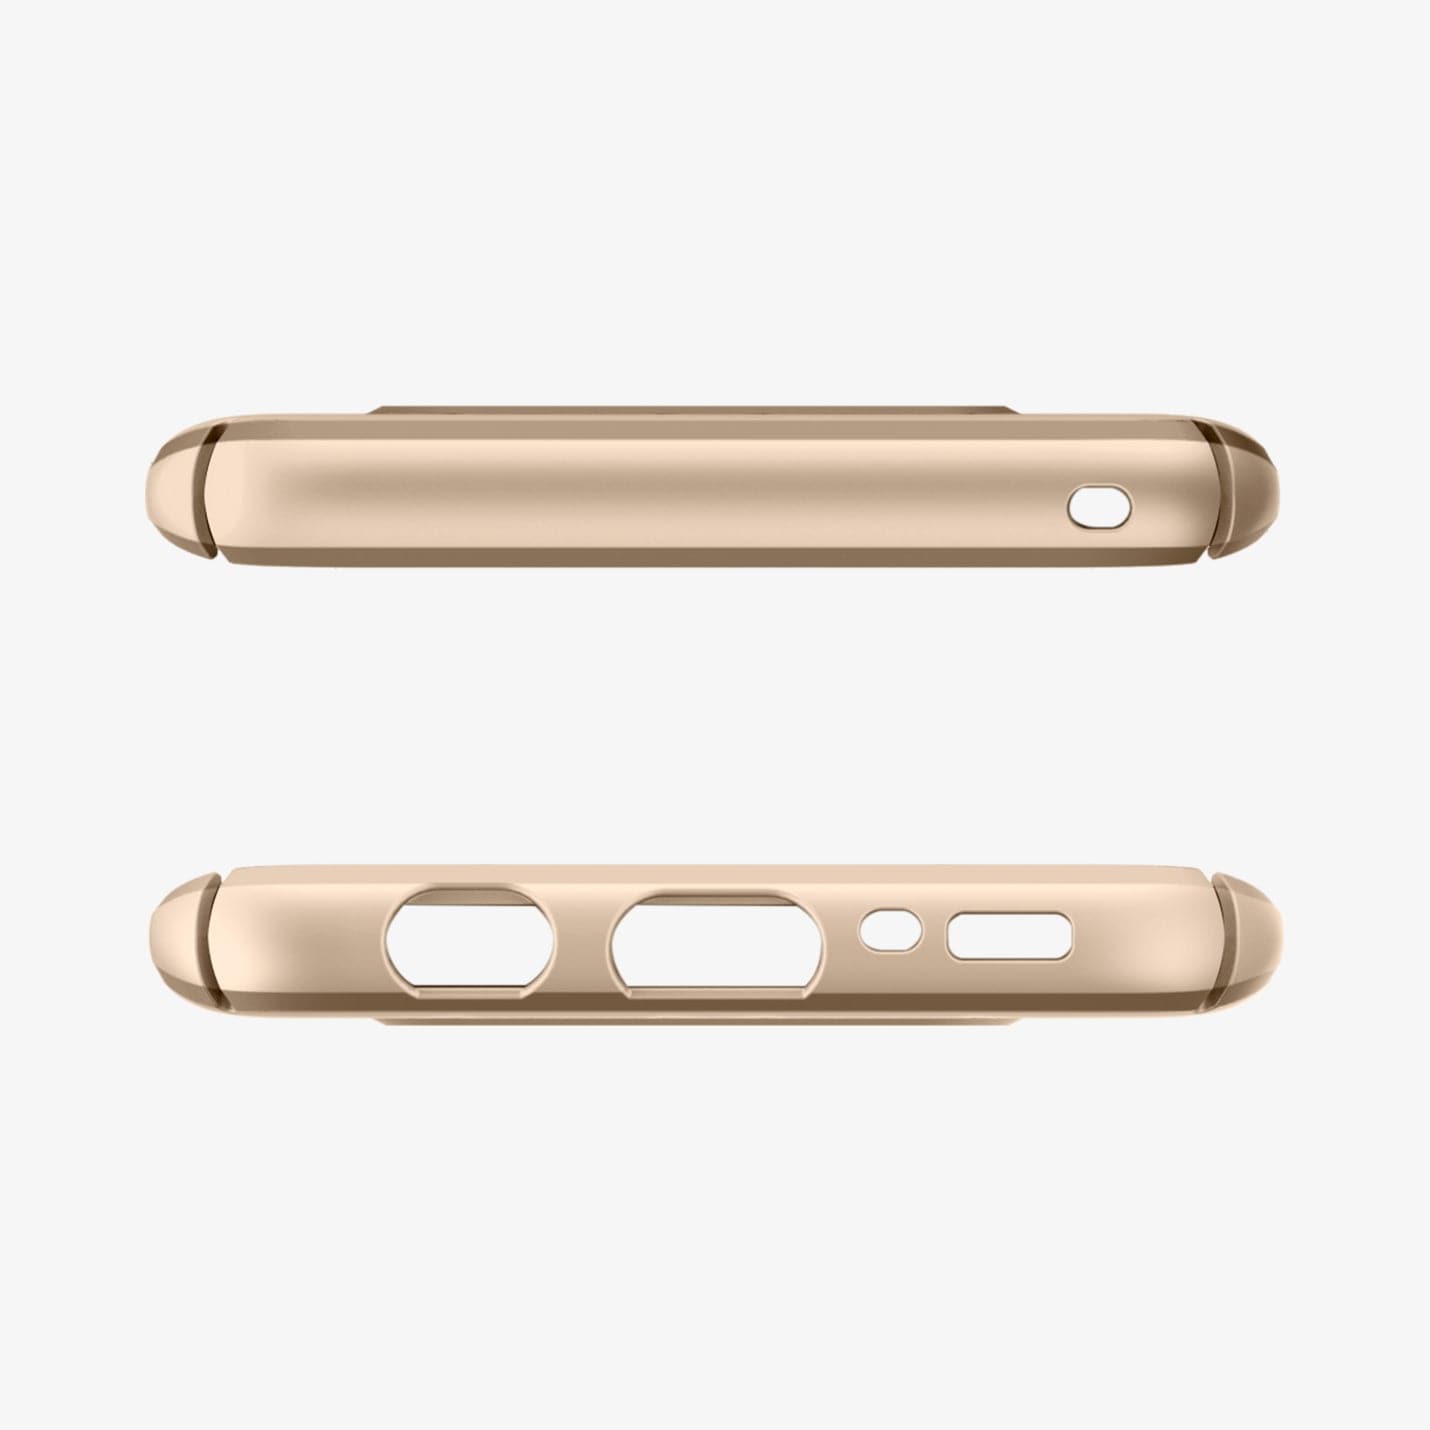 565CS21622 - Galaxy S8 Series Thin Fit Case in maple gold showing the top and bottom